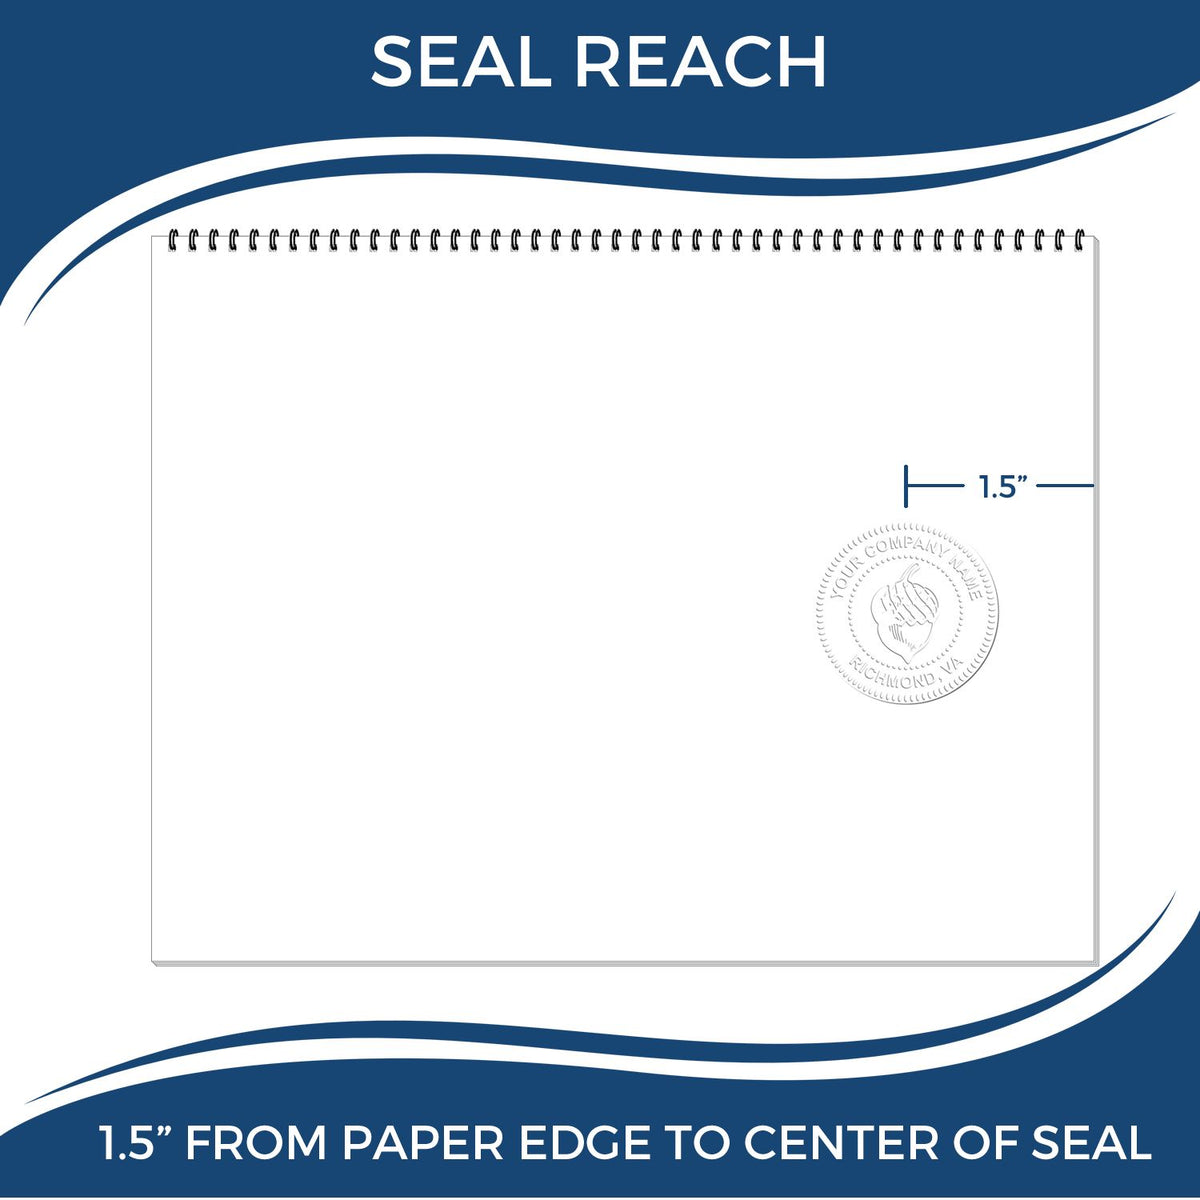 An infographic showing the seal reach which is represented by a ruler and a miniature seal image of the Hybrid Nevada Land Surveyor Seal